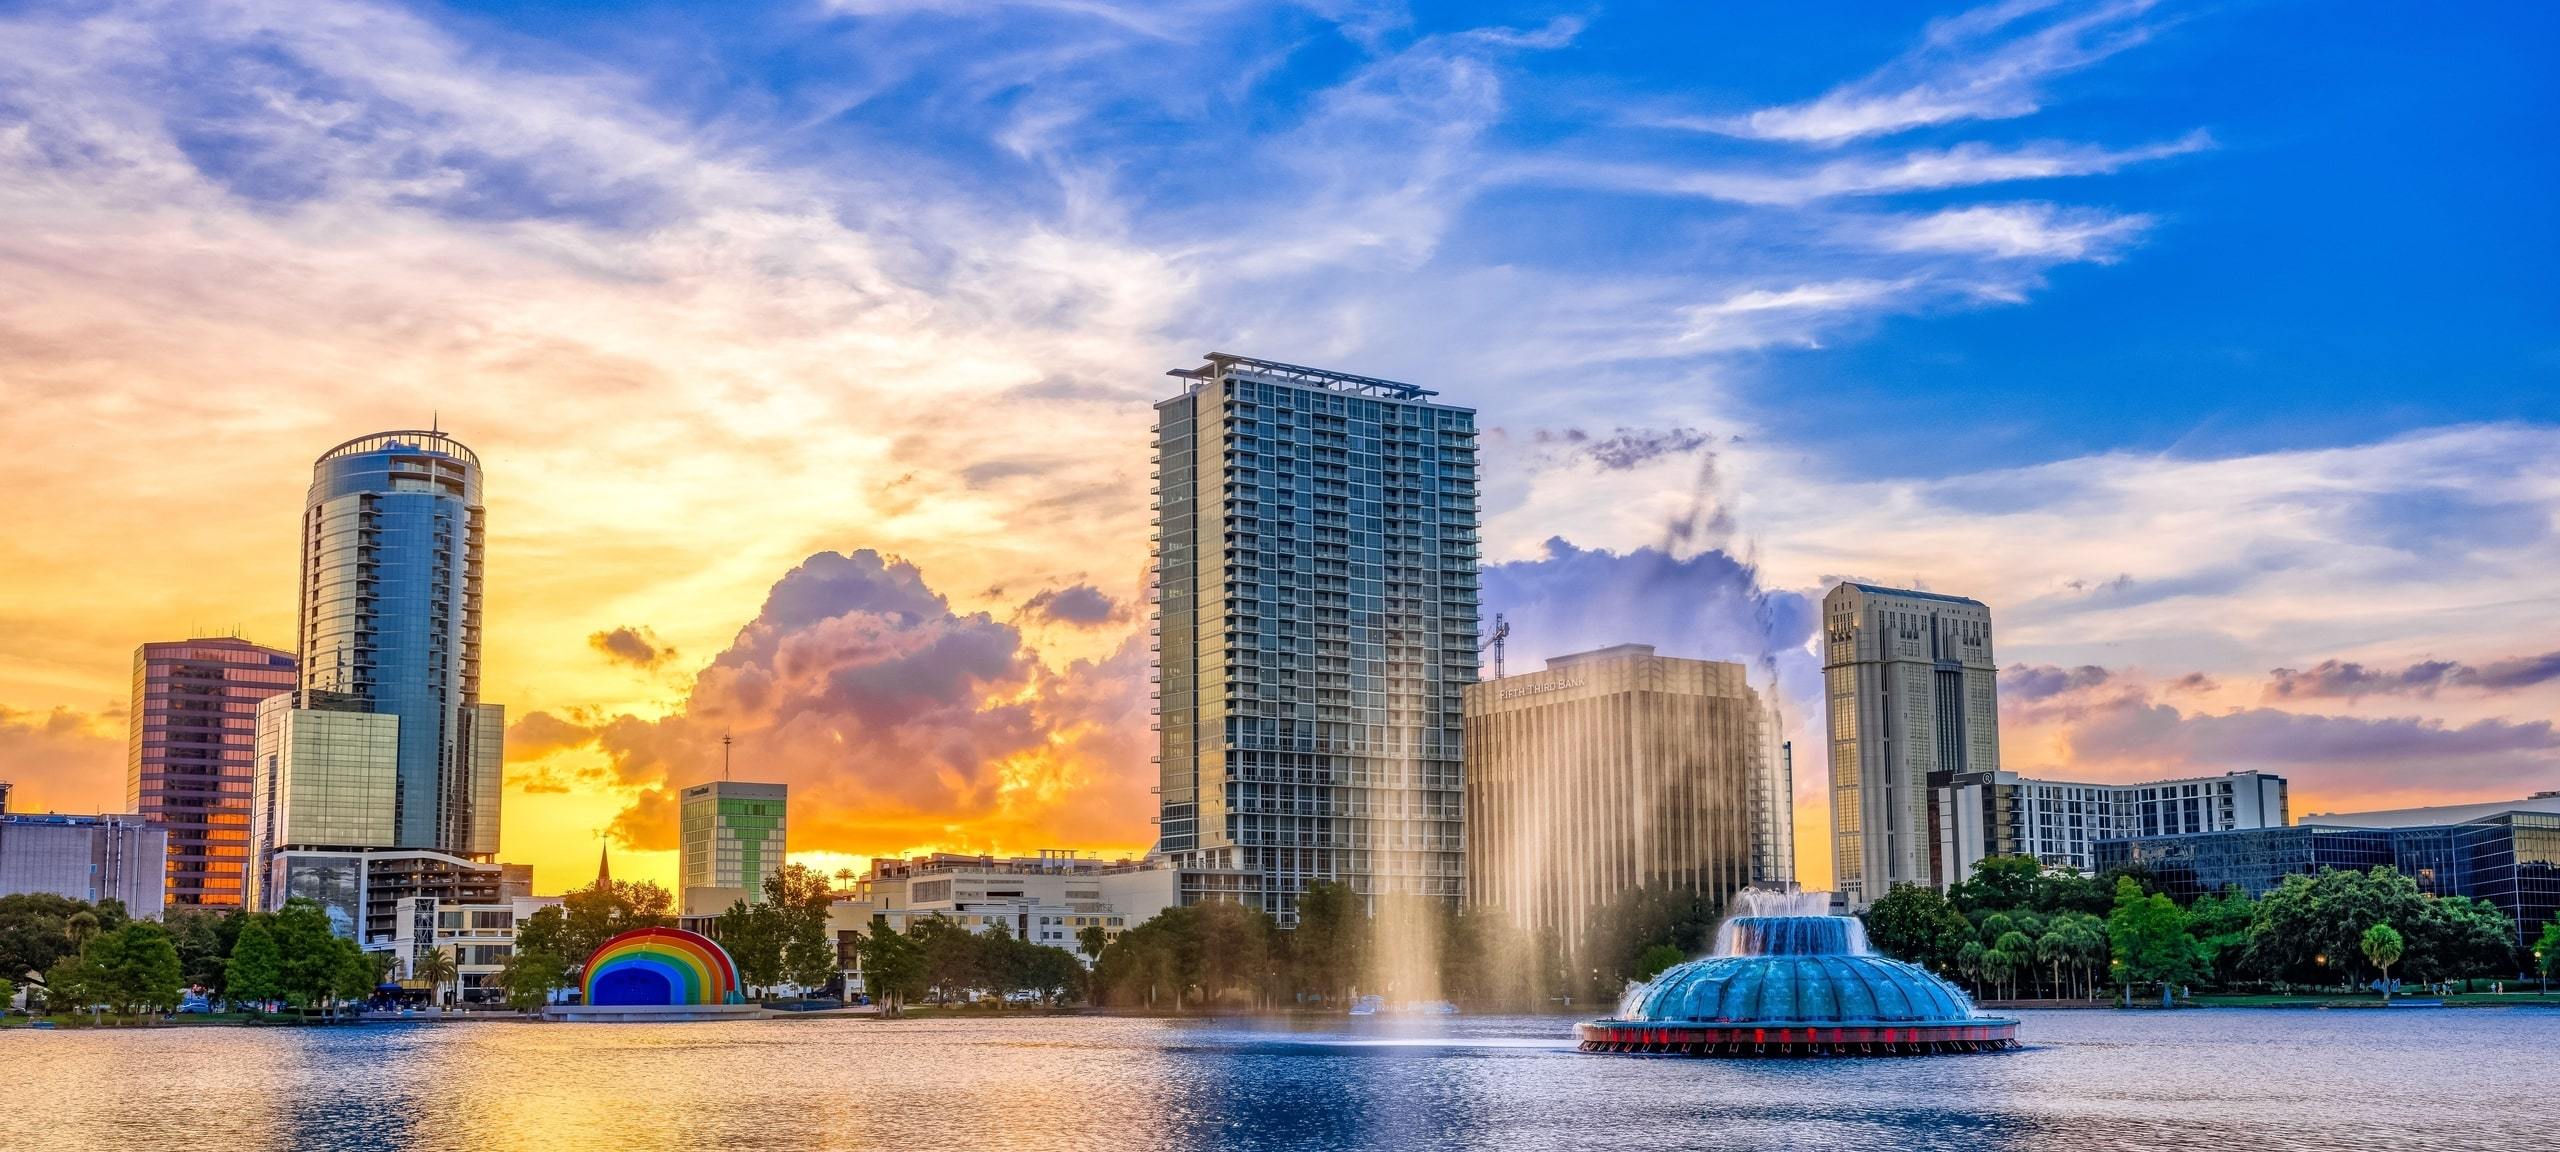 Sunset over Lake Eola Park in Downtown Orlando